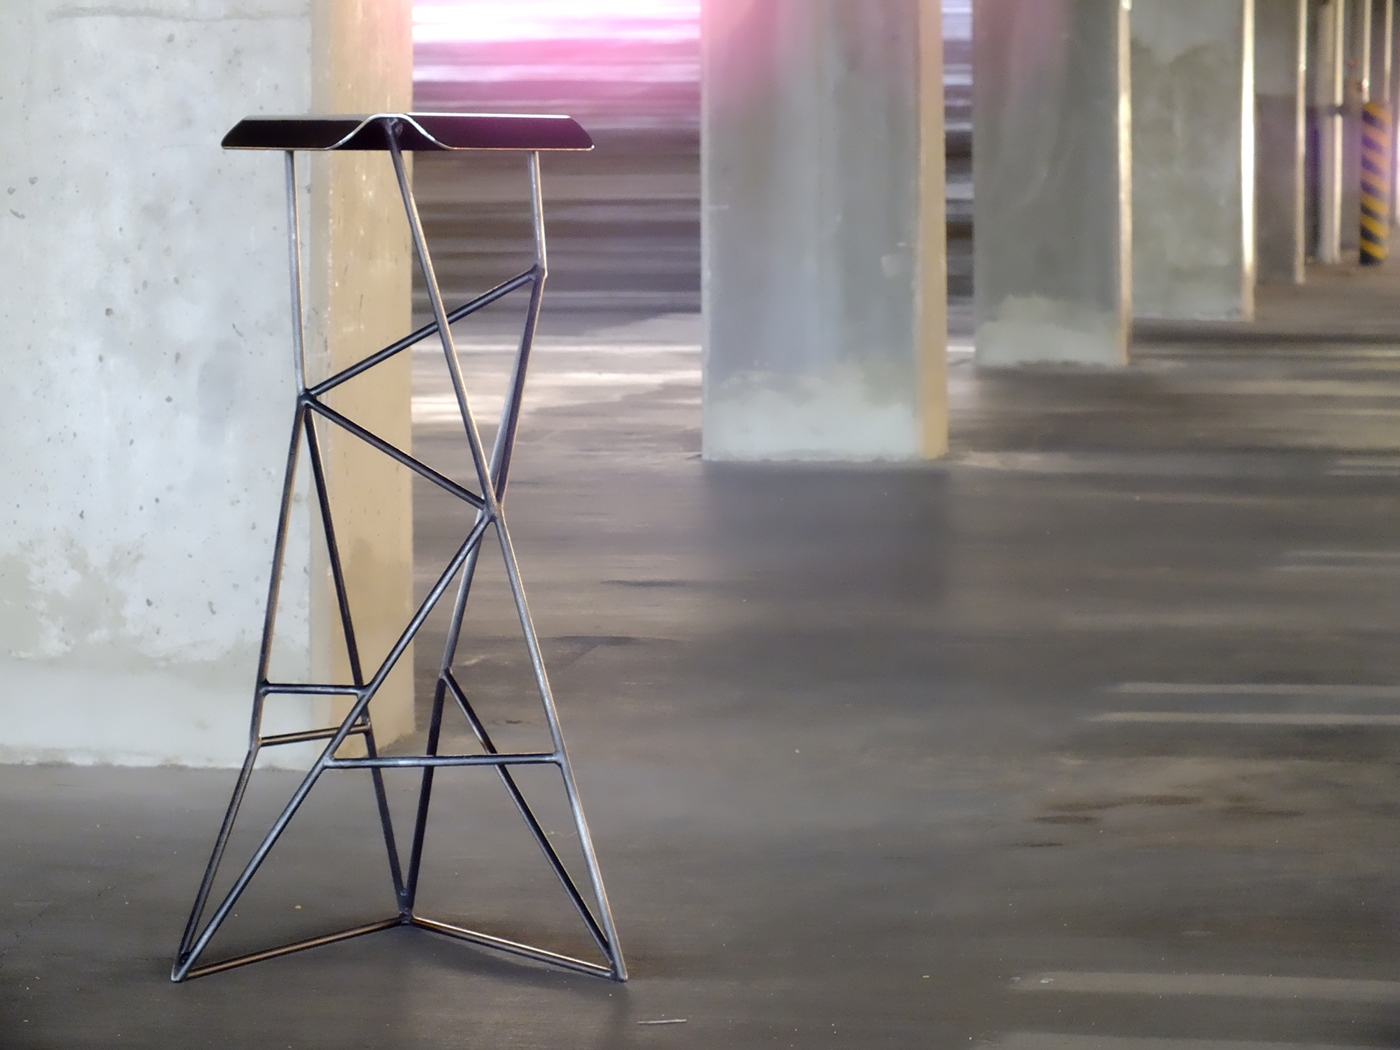 stool  art  chair  furniture  SEAT   steel  stainless  metal  welded black  polished  triangle